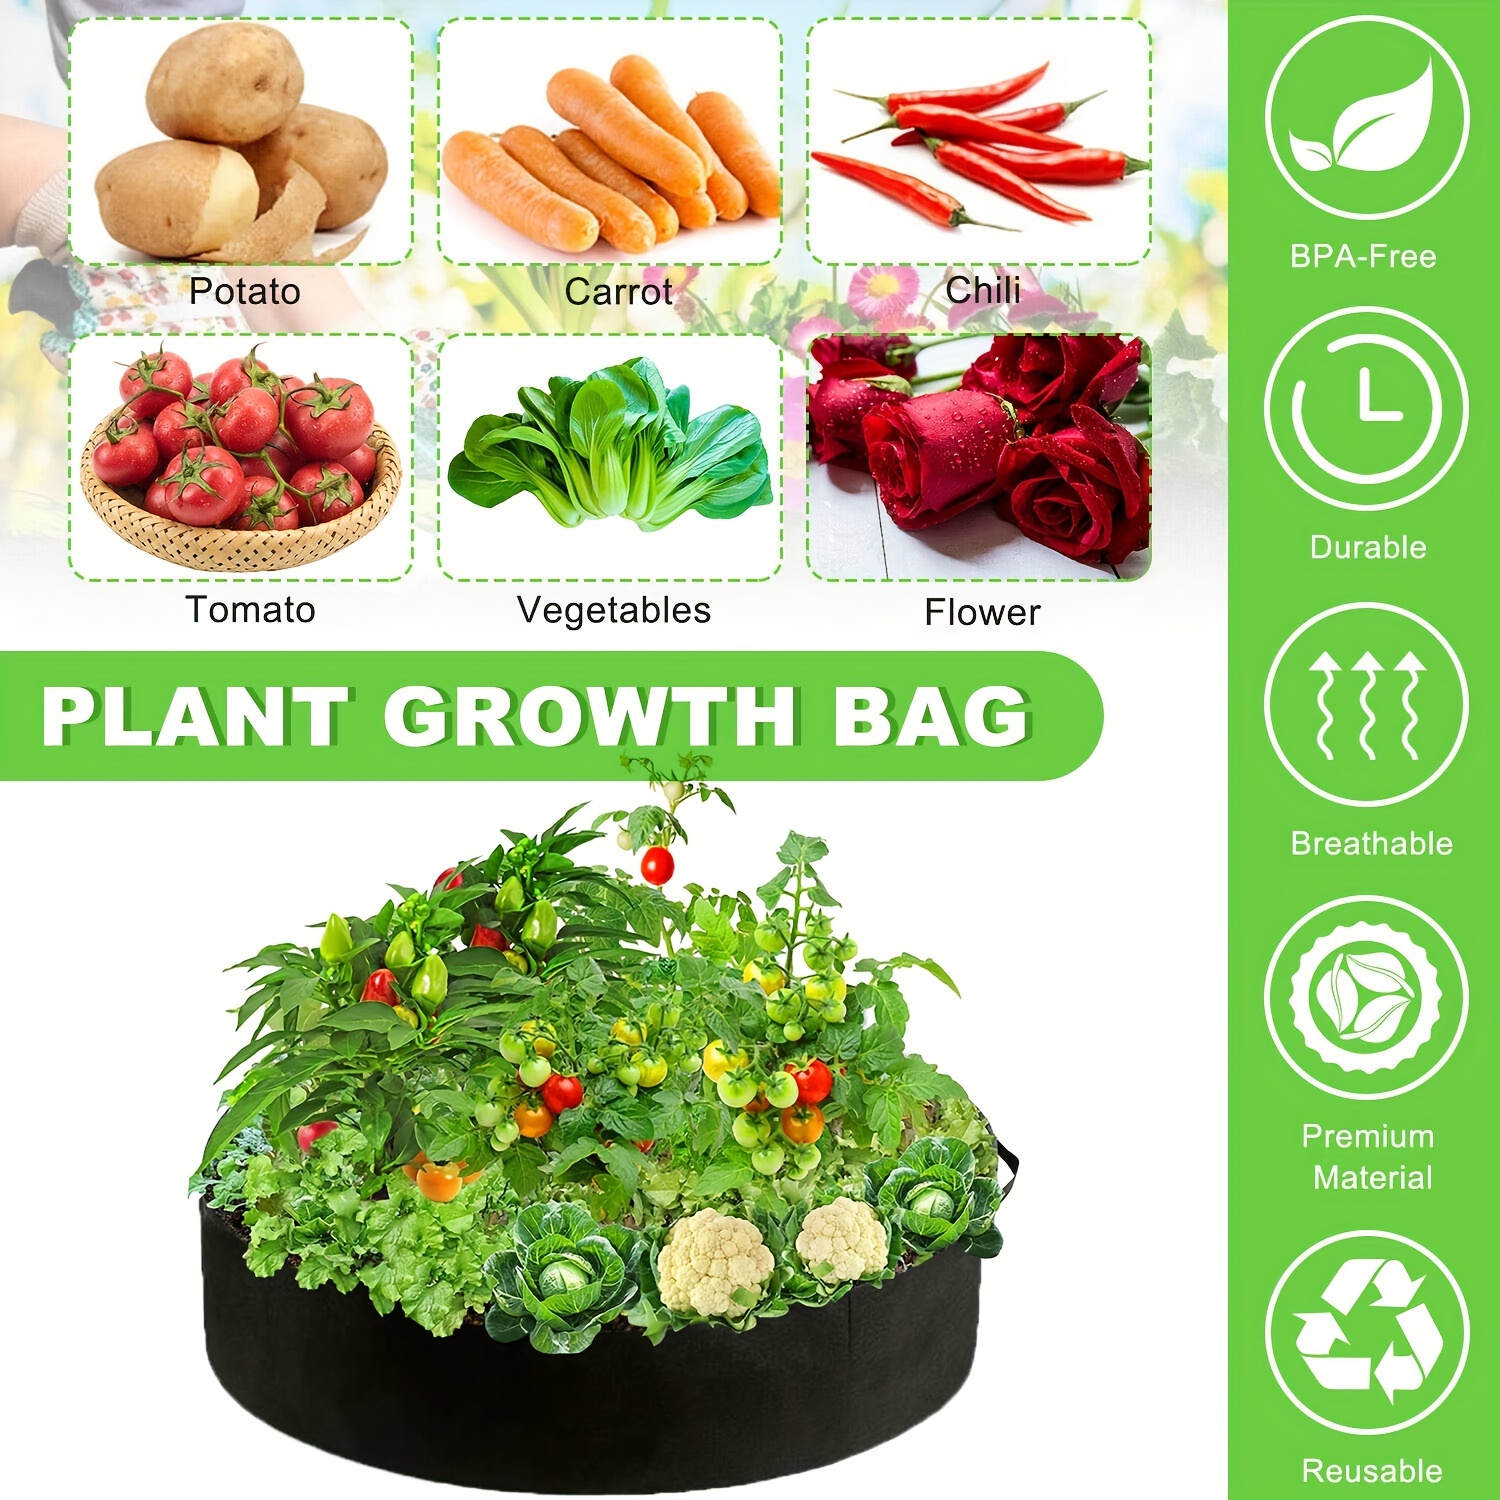 Grow Your Own Vegetables With This Gallon Plant Grow Bag - Durable